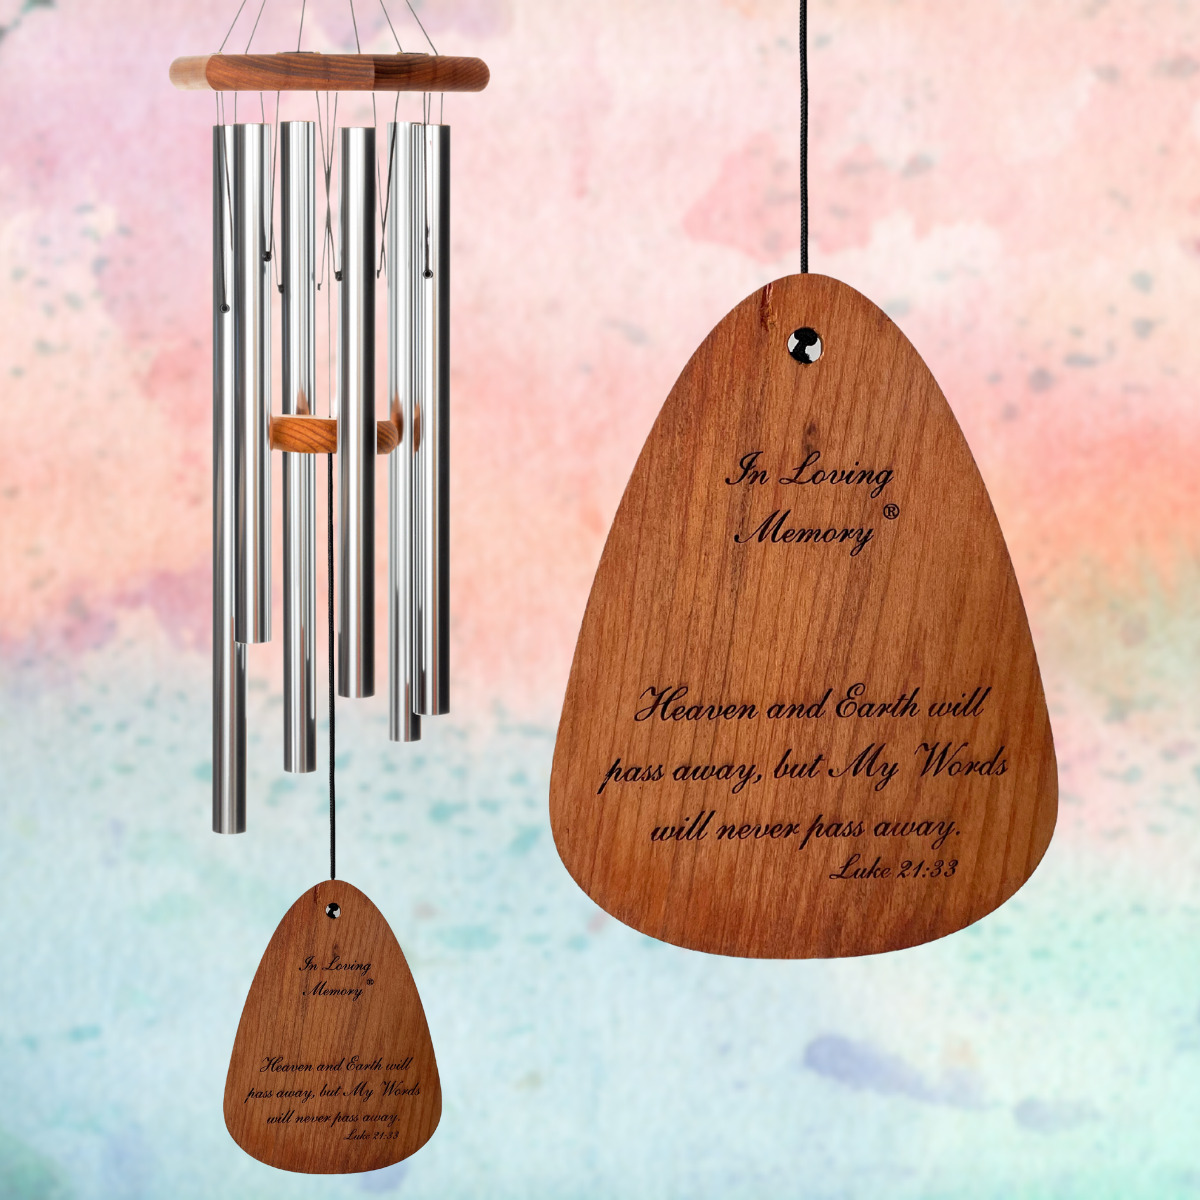 In Loving Memory 35 Inch Windchime - My Words will never pass away... in Sliver